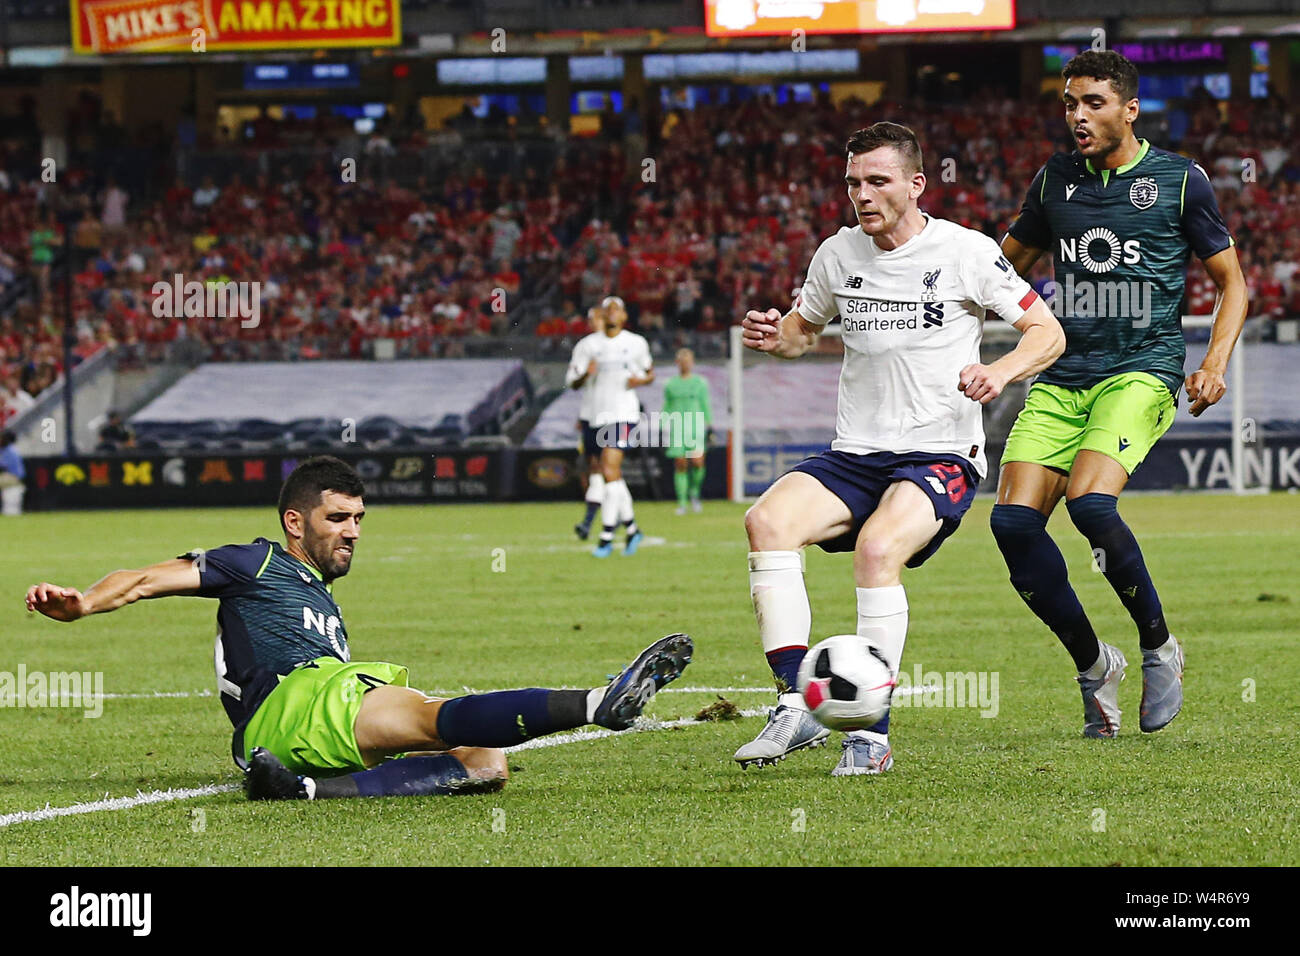 New York, USA. 24th July, 2019. LUIS NETO (14) of Sporting CP battles for the ball against ANDY ROBERTSON (26) of Liverpool FC during first half of the soccer match at Yankee Stadium in Bronx, New York. Credit: Anna Sergeeva/ZUMA Wire/Alamy Live News Stock Photo